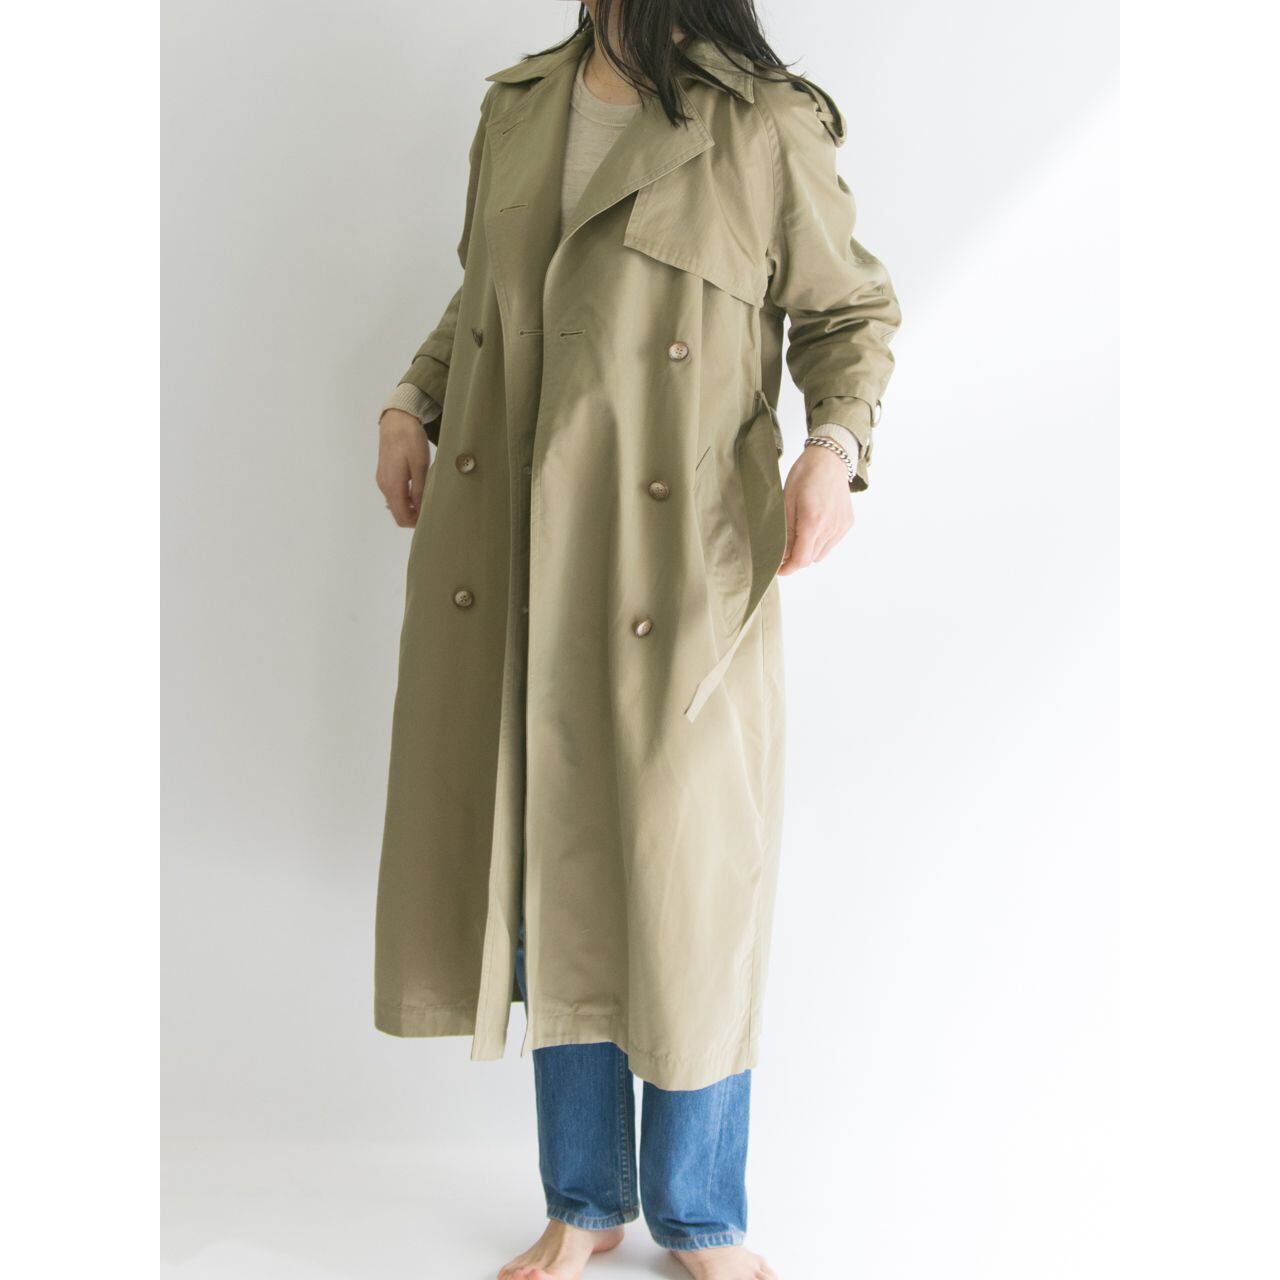 【Itokin Vintage】Made in Japan cotton-polyester trench coat（イトキン  日本製コットンポリトレンチコート）2b | MASCOT/E powered by BASE